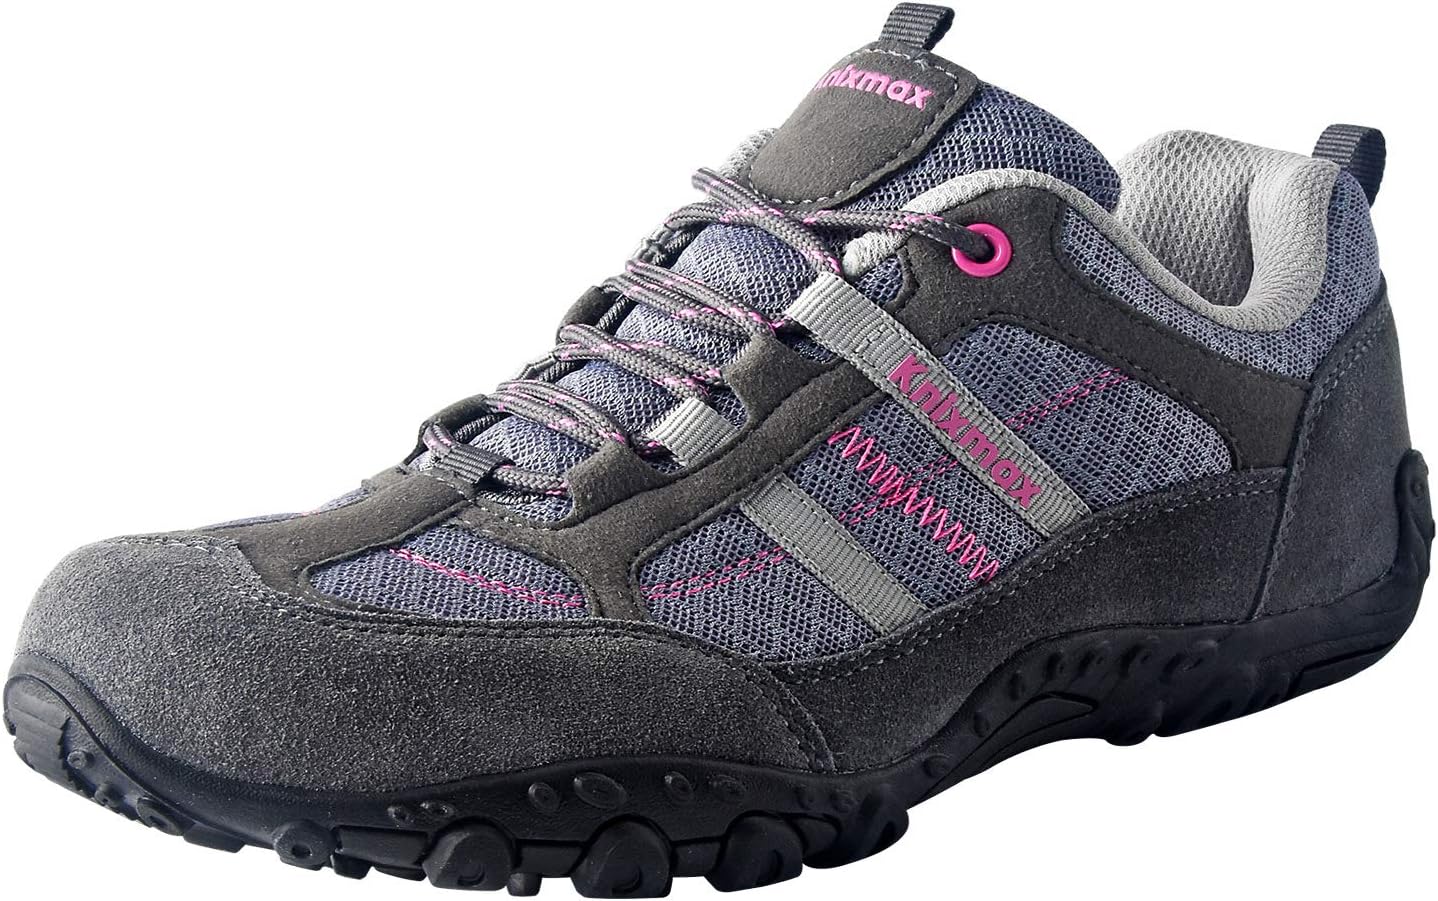 camp shoes backpacking light detailed review